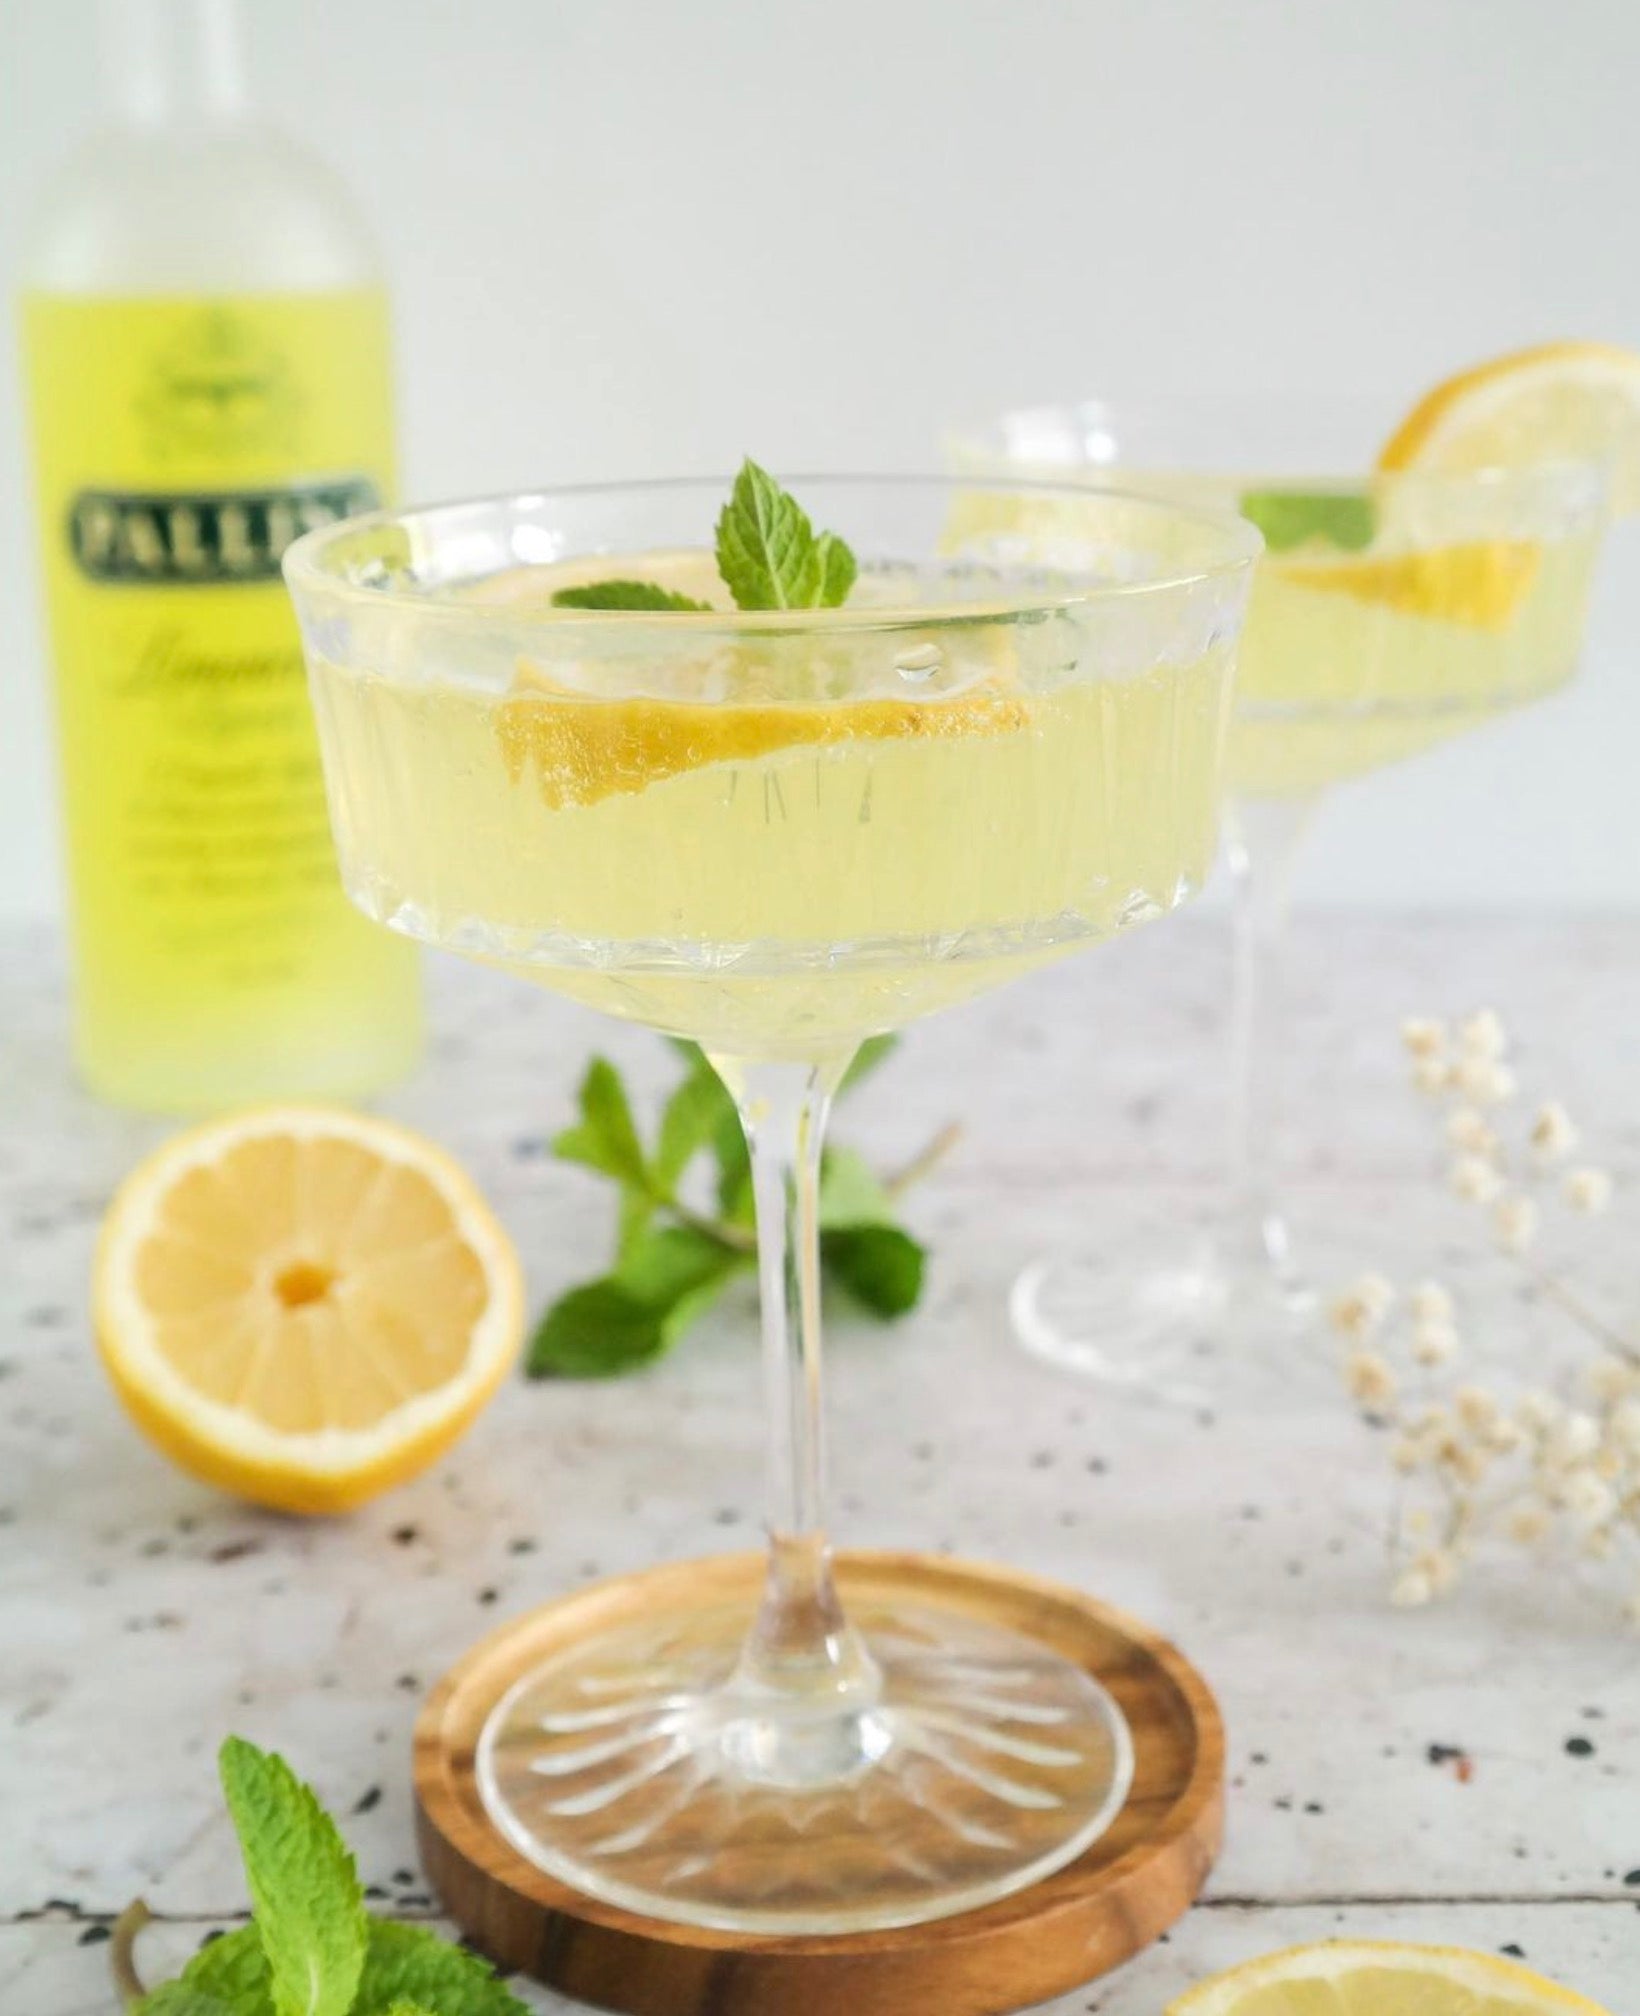 Pallini Limoncello Liqueur | Delivery & Gifting Available